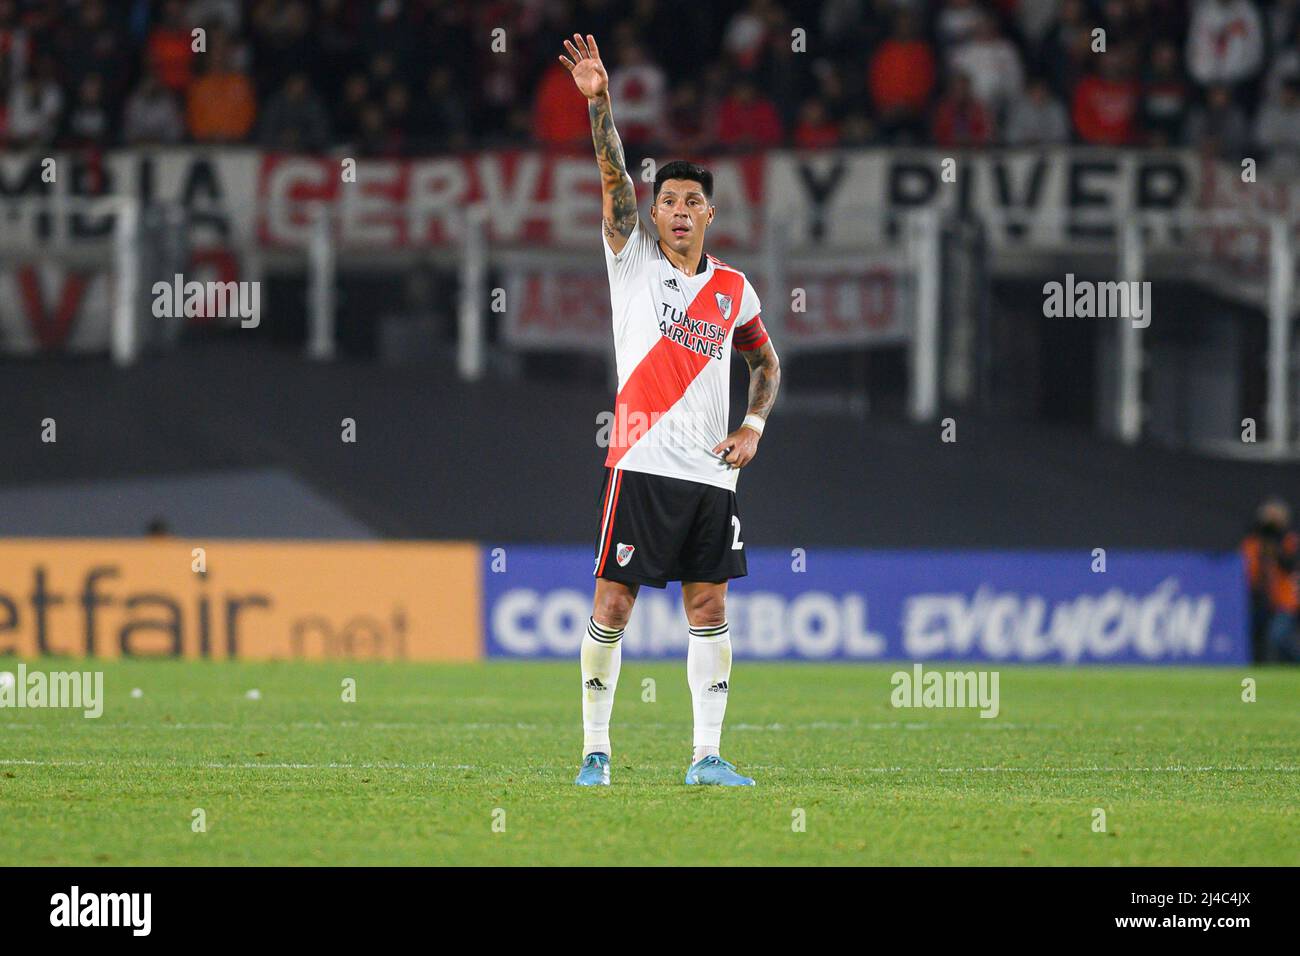 Buenos Aires, Argentina. 13th Apr, 2022. Enzo Perez of River Plate reacts during the 2022 Copa Conmebol Libertadores match between River Plate and Fortaleza at Estadio Monumental Antonio Vespucio Liberti. Final score; River Plate 2:0 Fortaleza. Credit: SOPA Images Limited/Alamy Live News Stock Photo